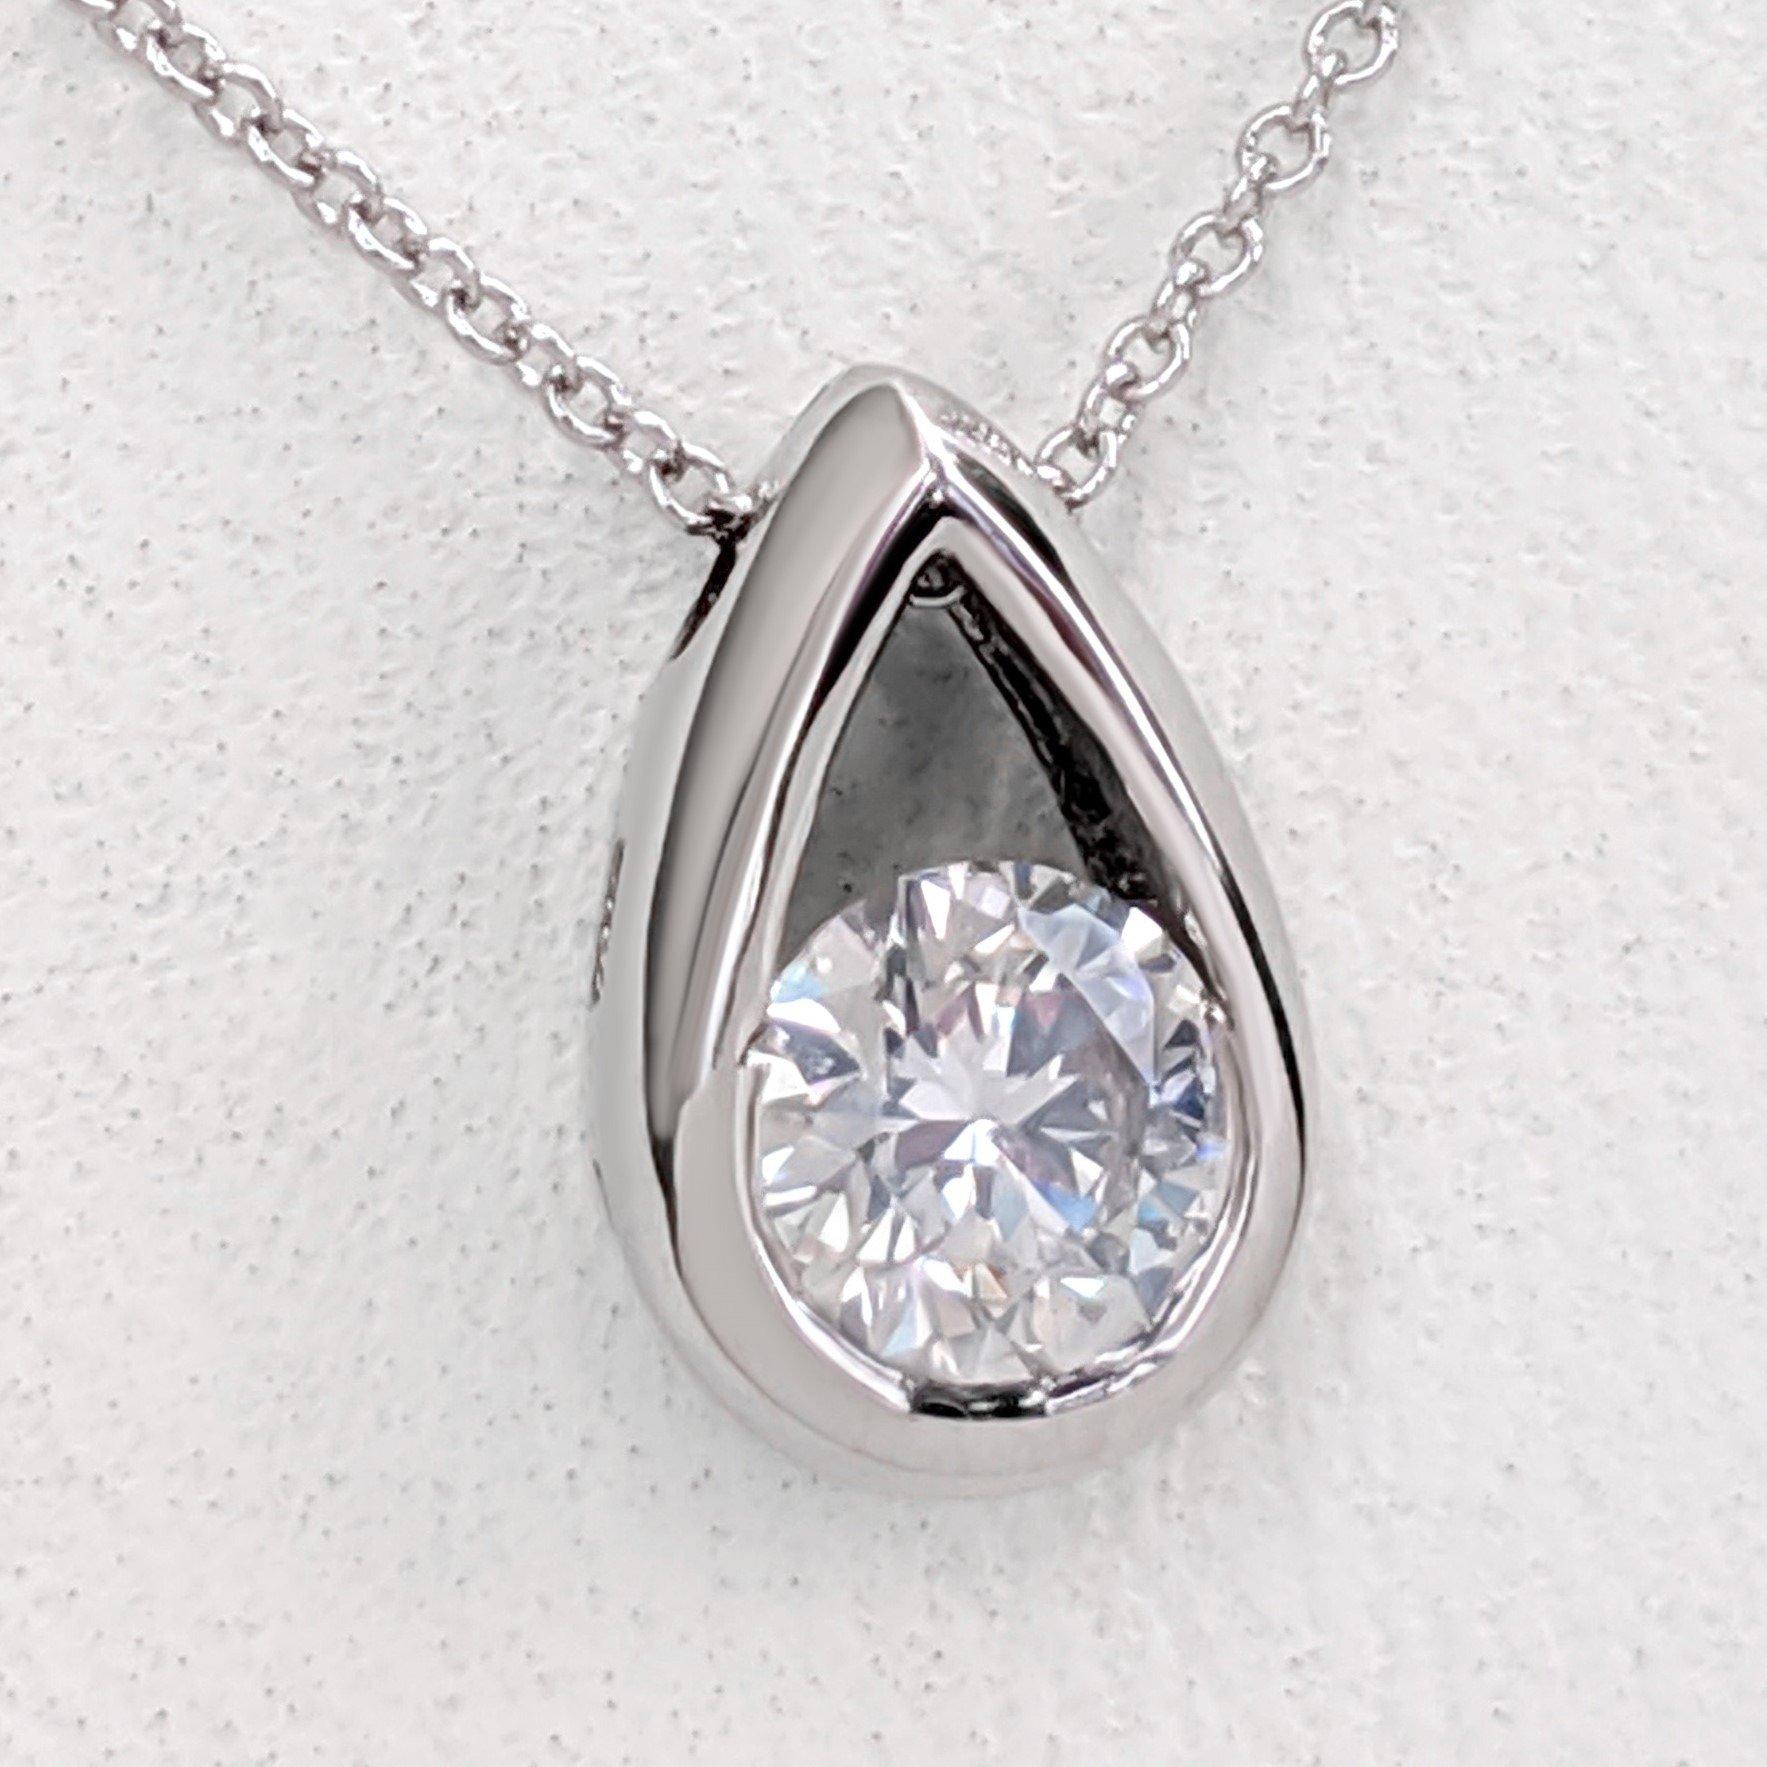 Round Cut NO RESERVE! 0.50 Carat Diamond - 14 kt. White gold - Necklace with pendant For Sale